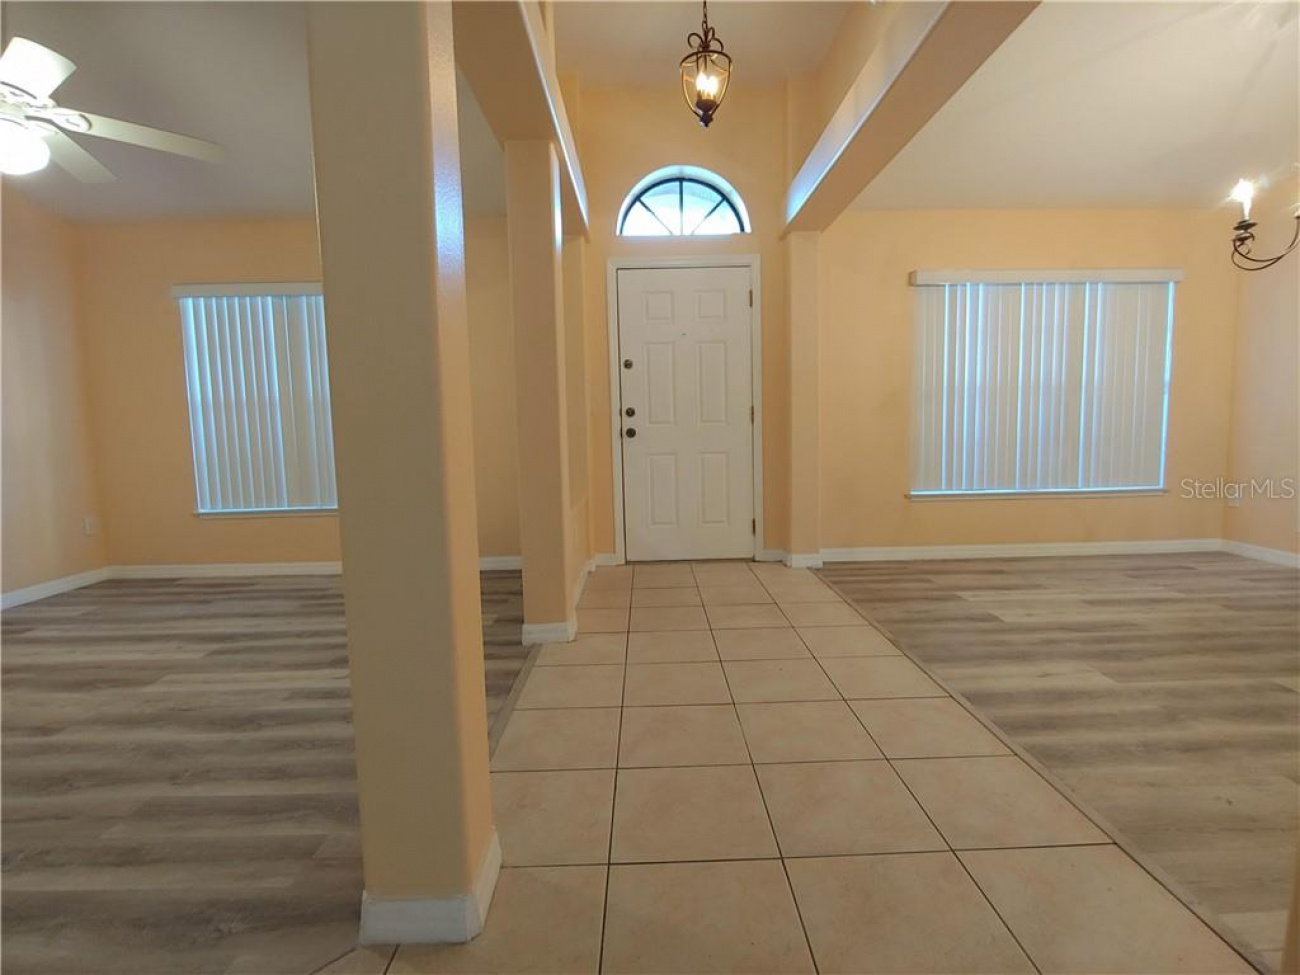 Entry way with formal living and dining room